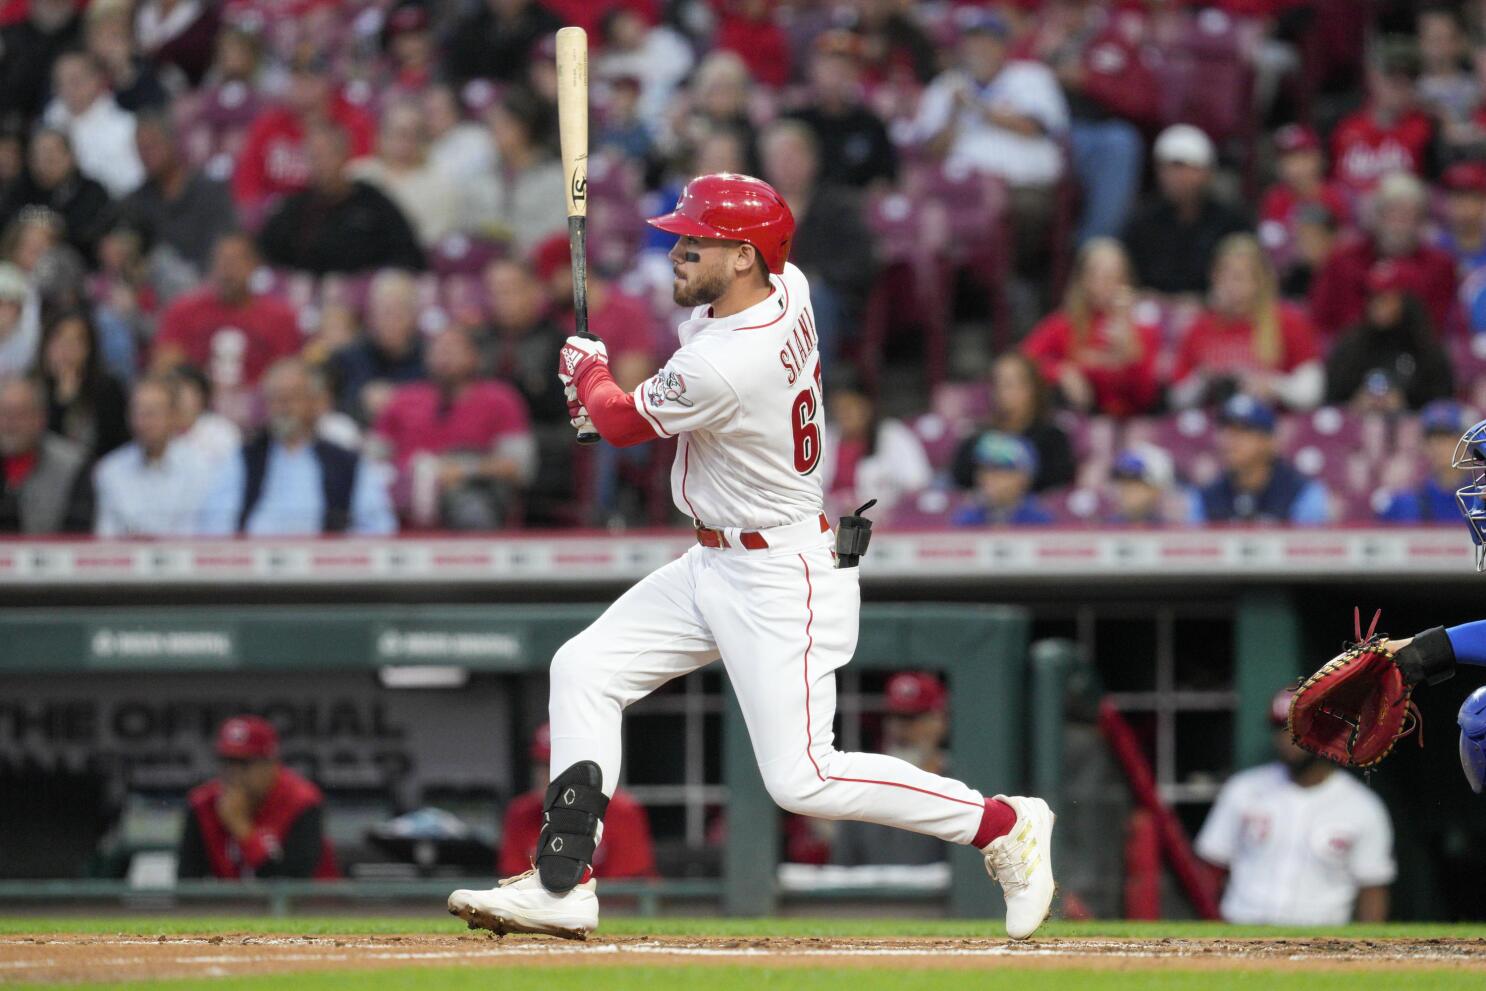 Reds lose in rout to Cubs for second straight game